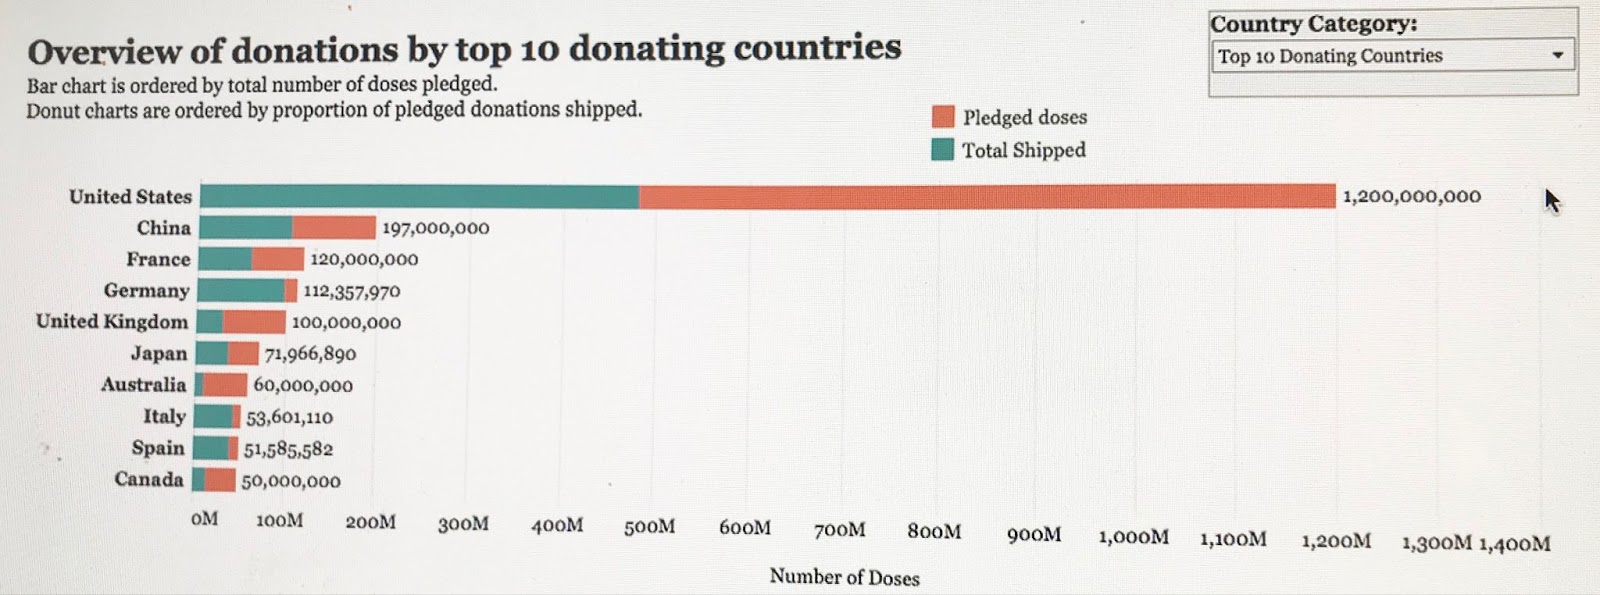 Figure 3. Overview of COVID-19 vaccine donations pledged and shipped (in millions of doses), by the top 10 donating countries. Donations shipped are shown in green, on the left side of the bar chart; donations pledged are shown in red, on the right side of the bar chart. The top 10 donating countries, starting with the largest donor, are: United States, China, France, Germany, United Kingdom, Japan, Australia, Italy, Spain, and Canada. Source: https://launchandscalefaster.org/covid-19/vaccinedonations